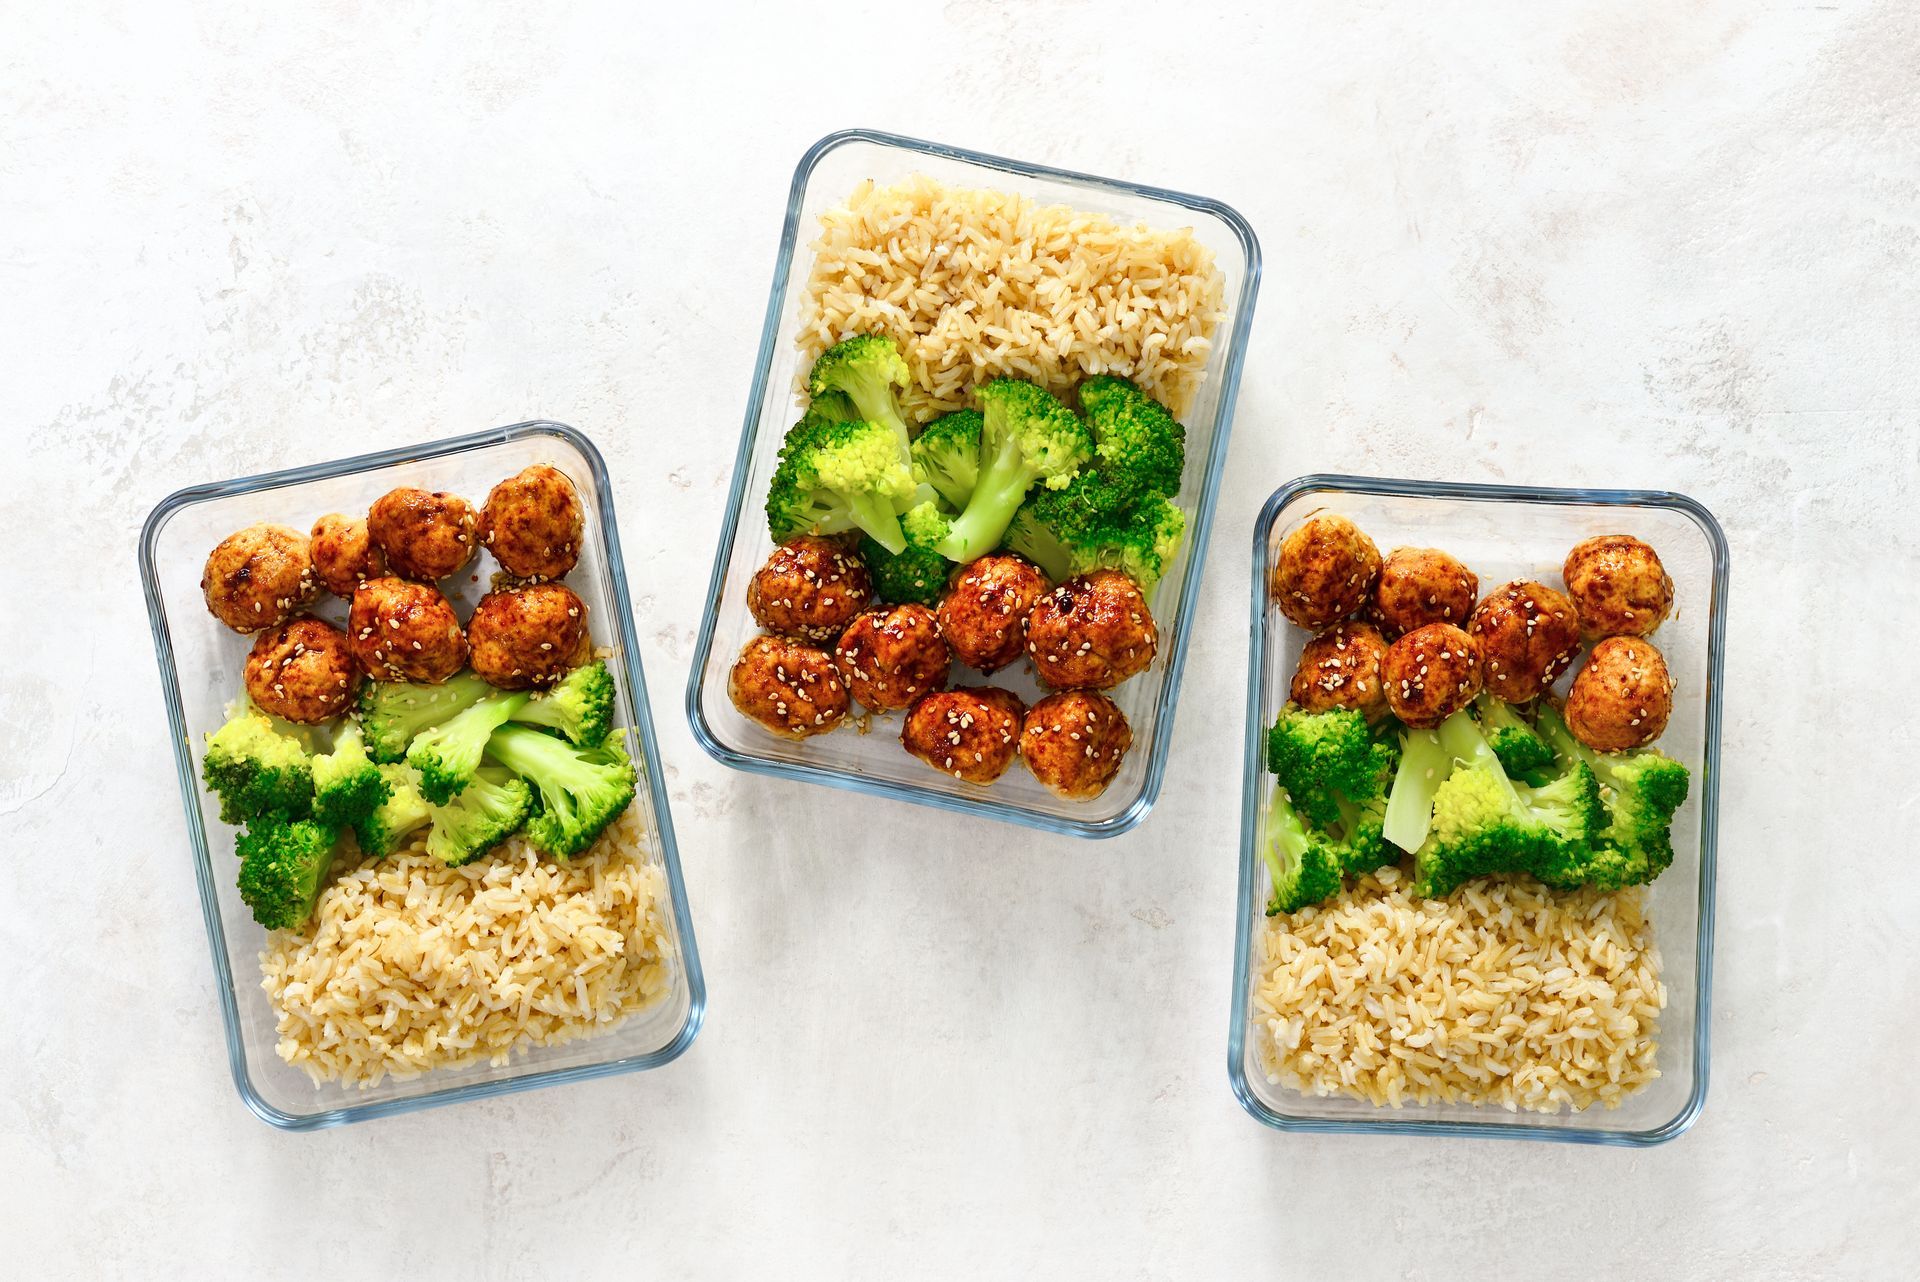 Three glass containers filled with meatballs , broccoli and rice.